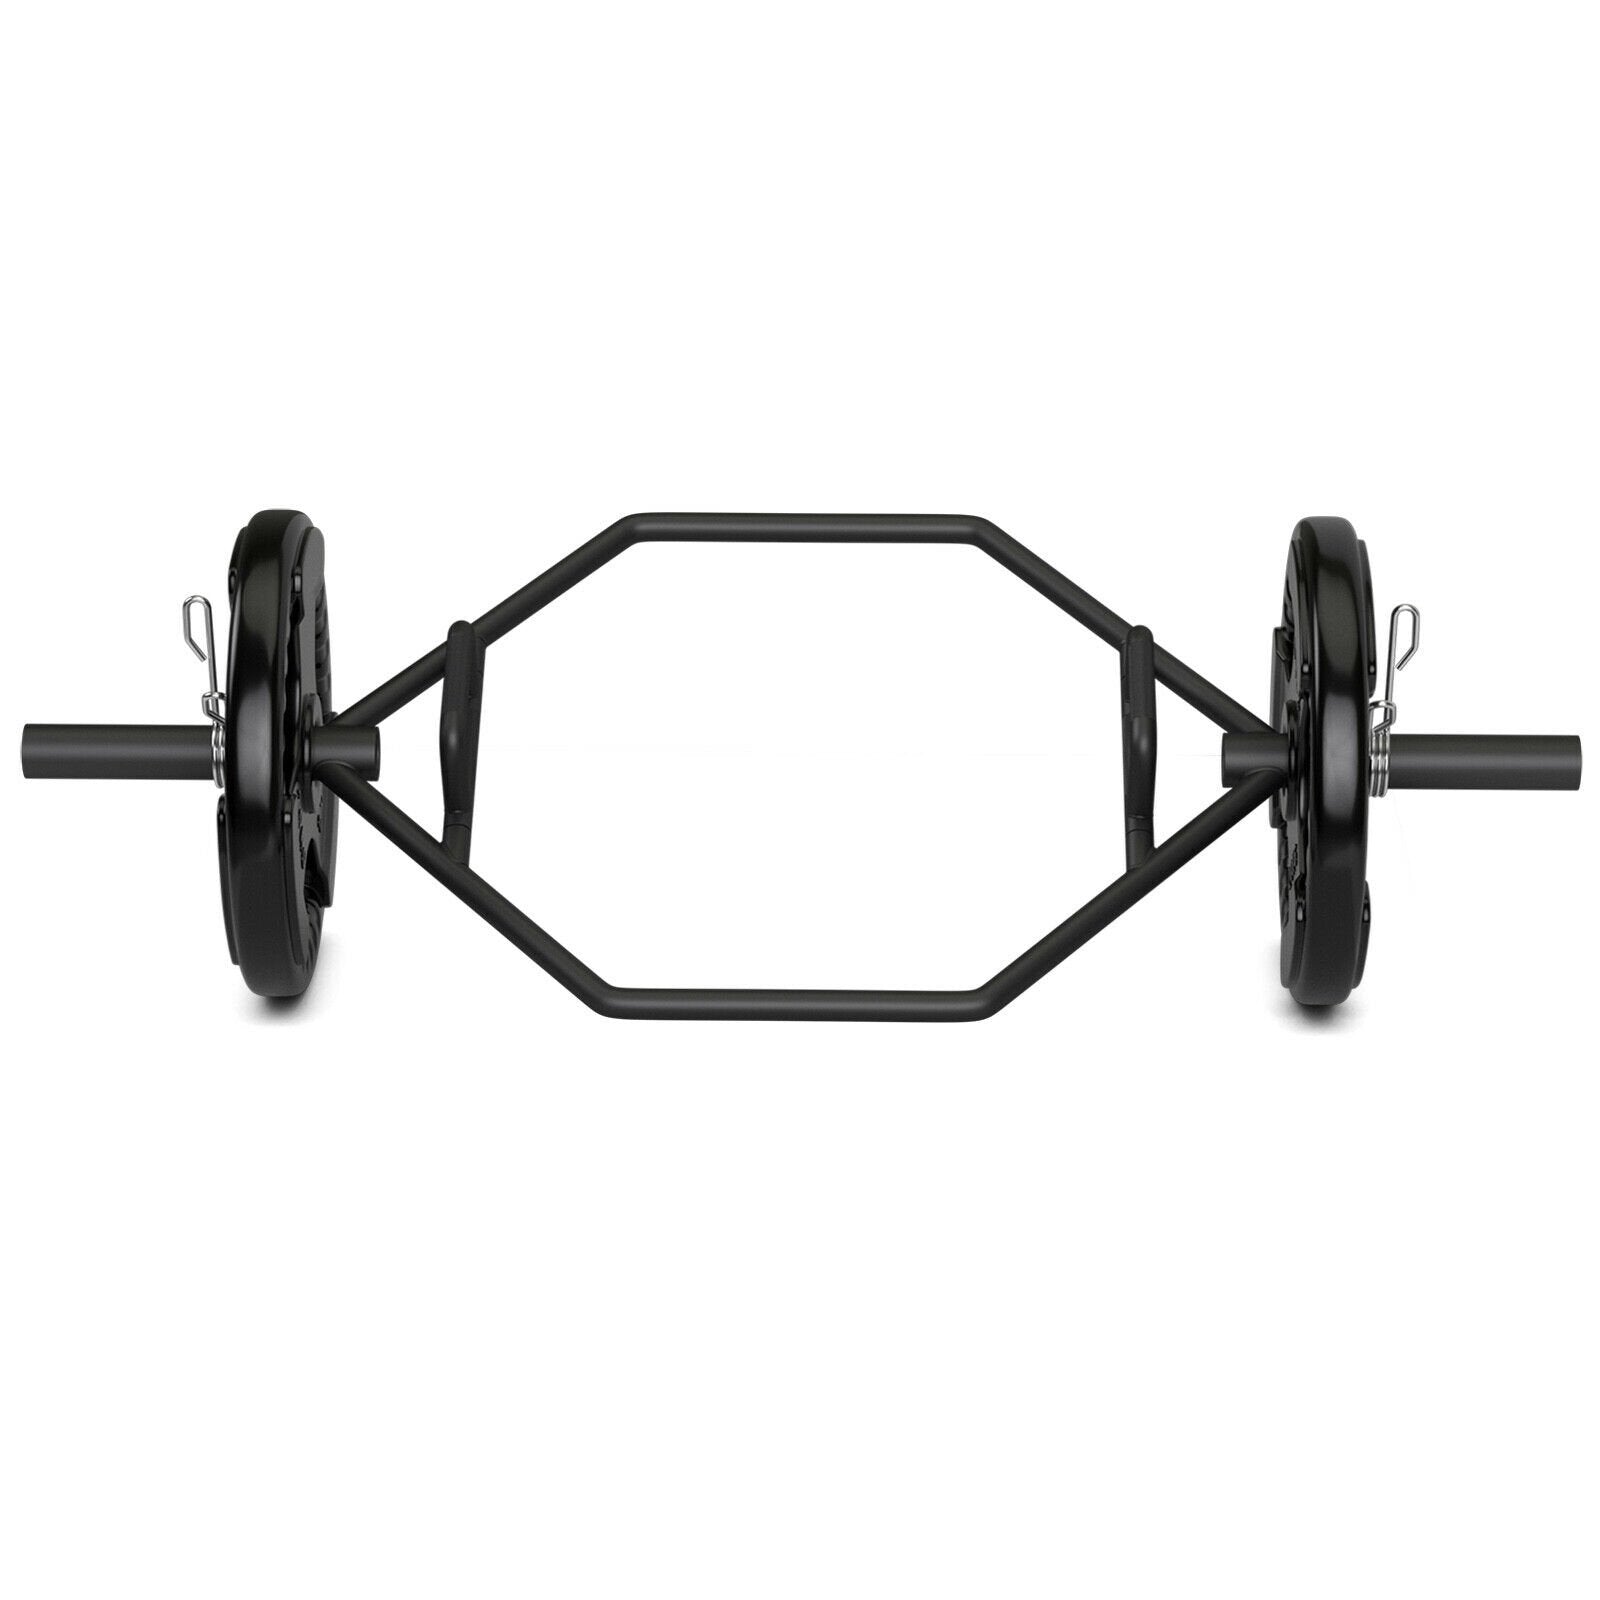 56 Inch Olympic Hexagon Deadlift Trap Bar with Folding Grips Powerlifting, Black - Gallery Canada